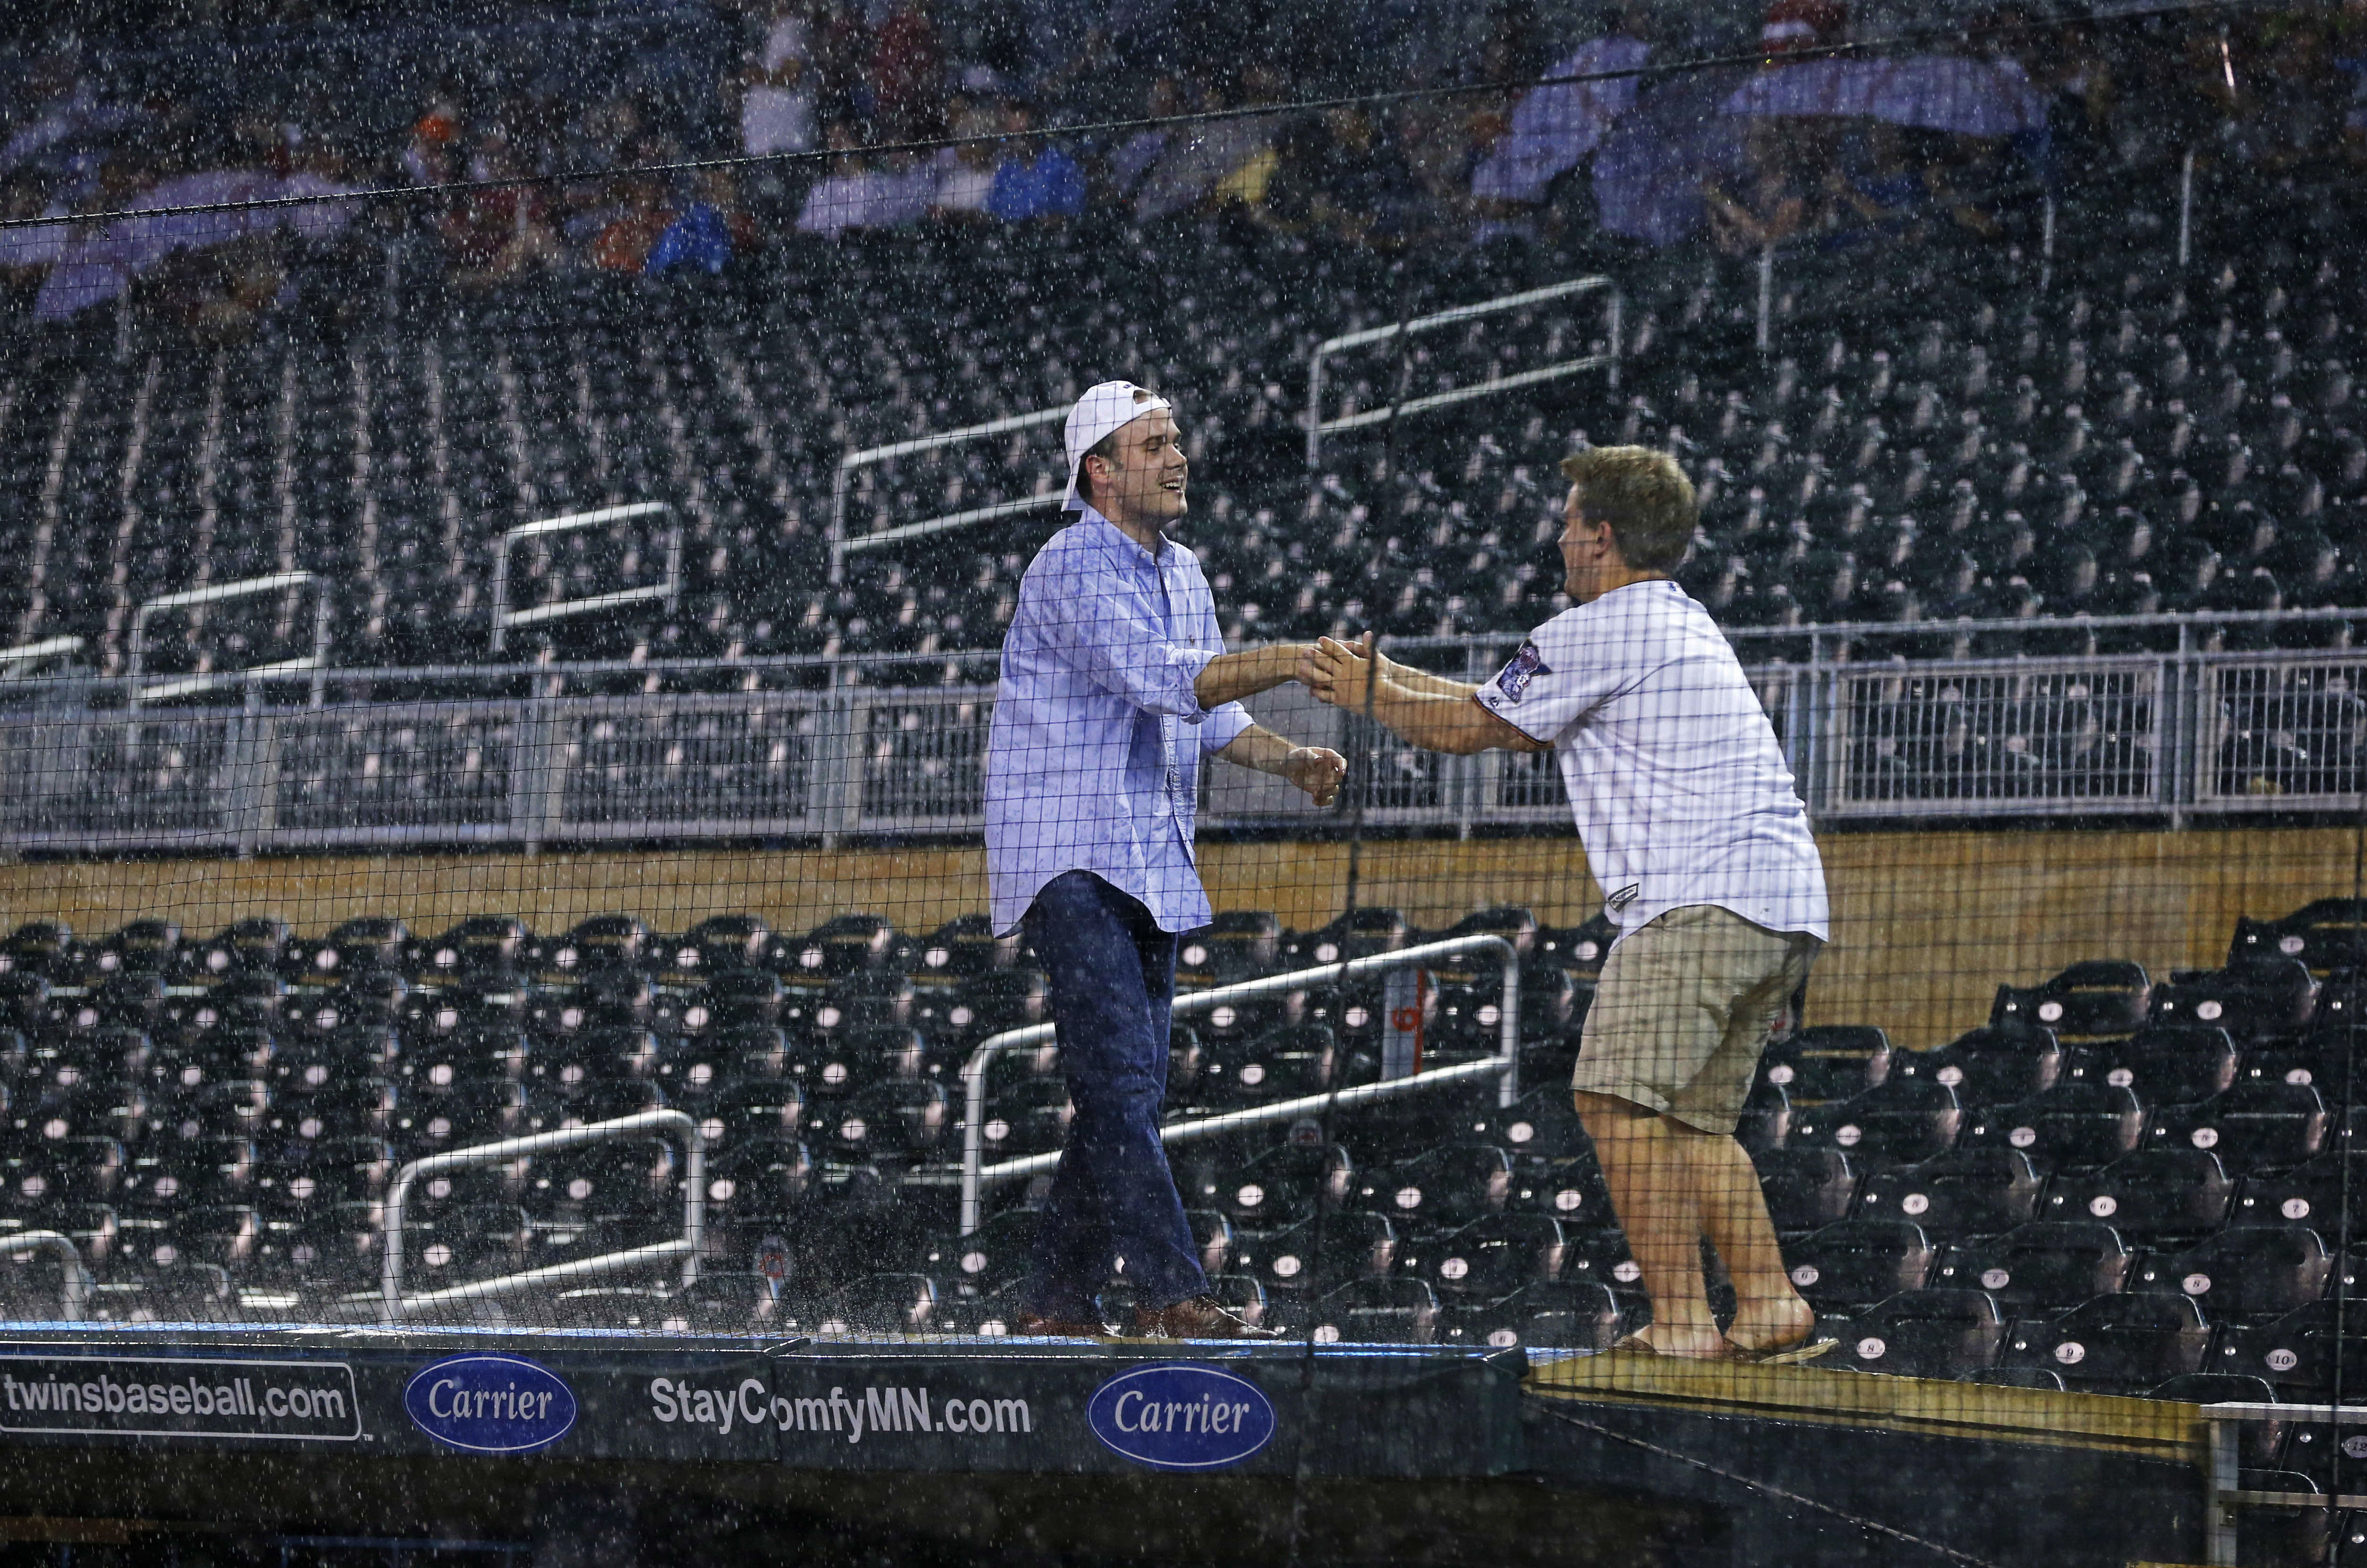 Two fans ignore the rain delay and celebrate atop the Minnesota Twins dugout during a rain delay in a baseball game against the Houston Astros Wednesday, Aug. 10, 2016 in Minneapolis. The Houston-Minnesota game was postponed Wednesday by persistent rain that started in the third inning and was forecast to last throughout the night. (AP Photo/Jim Mone)